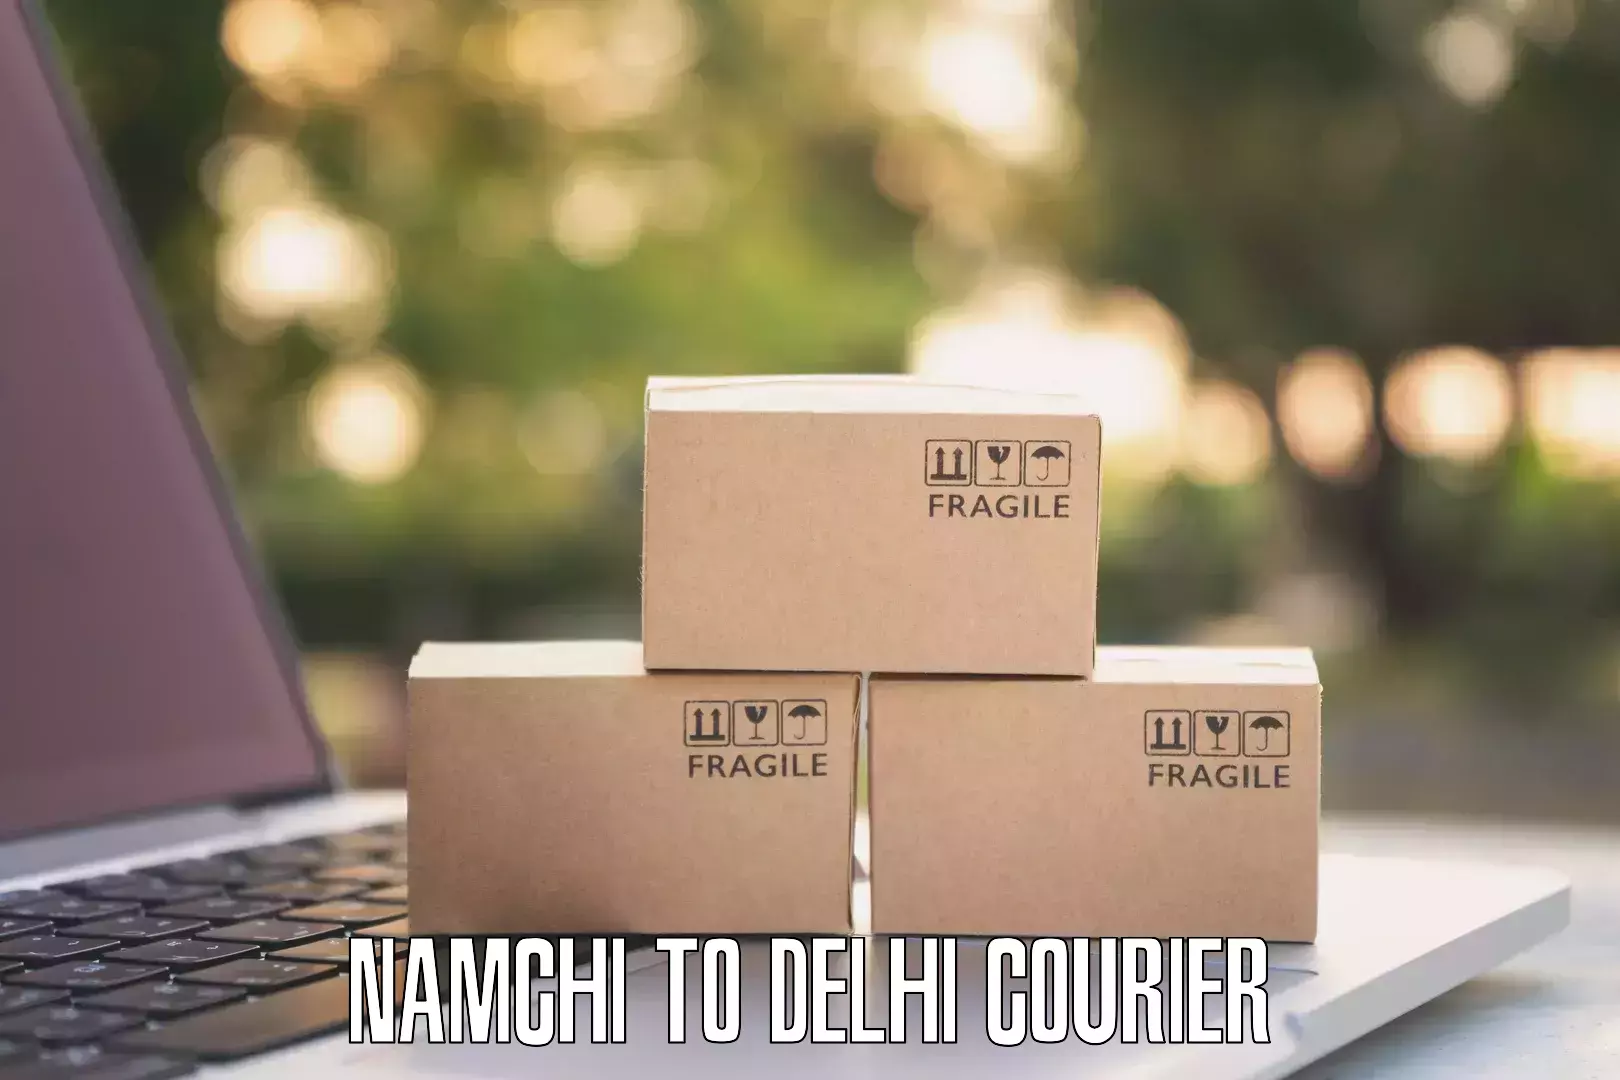 Next-day freight services Namchi to NCR